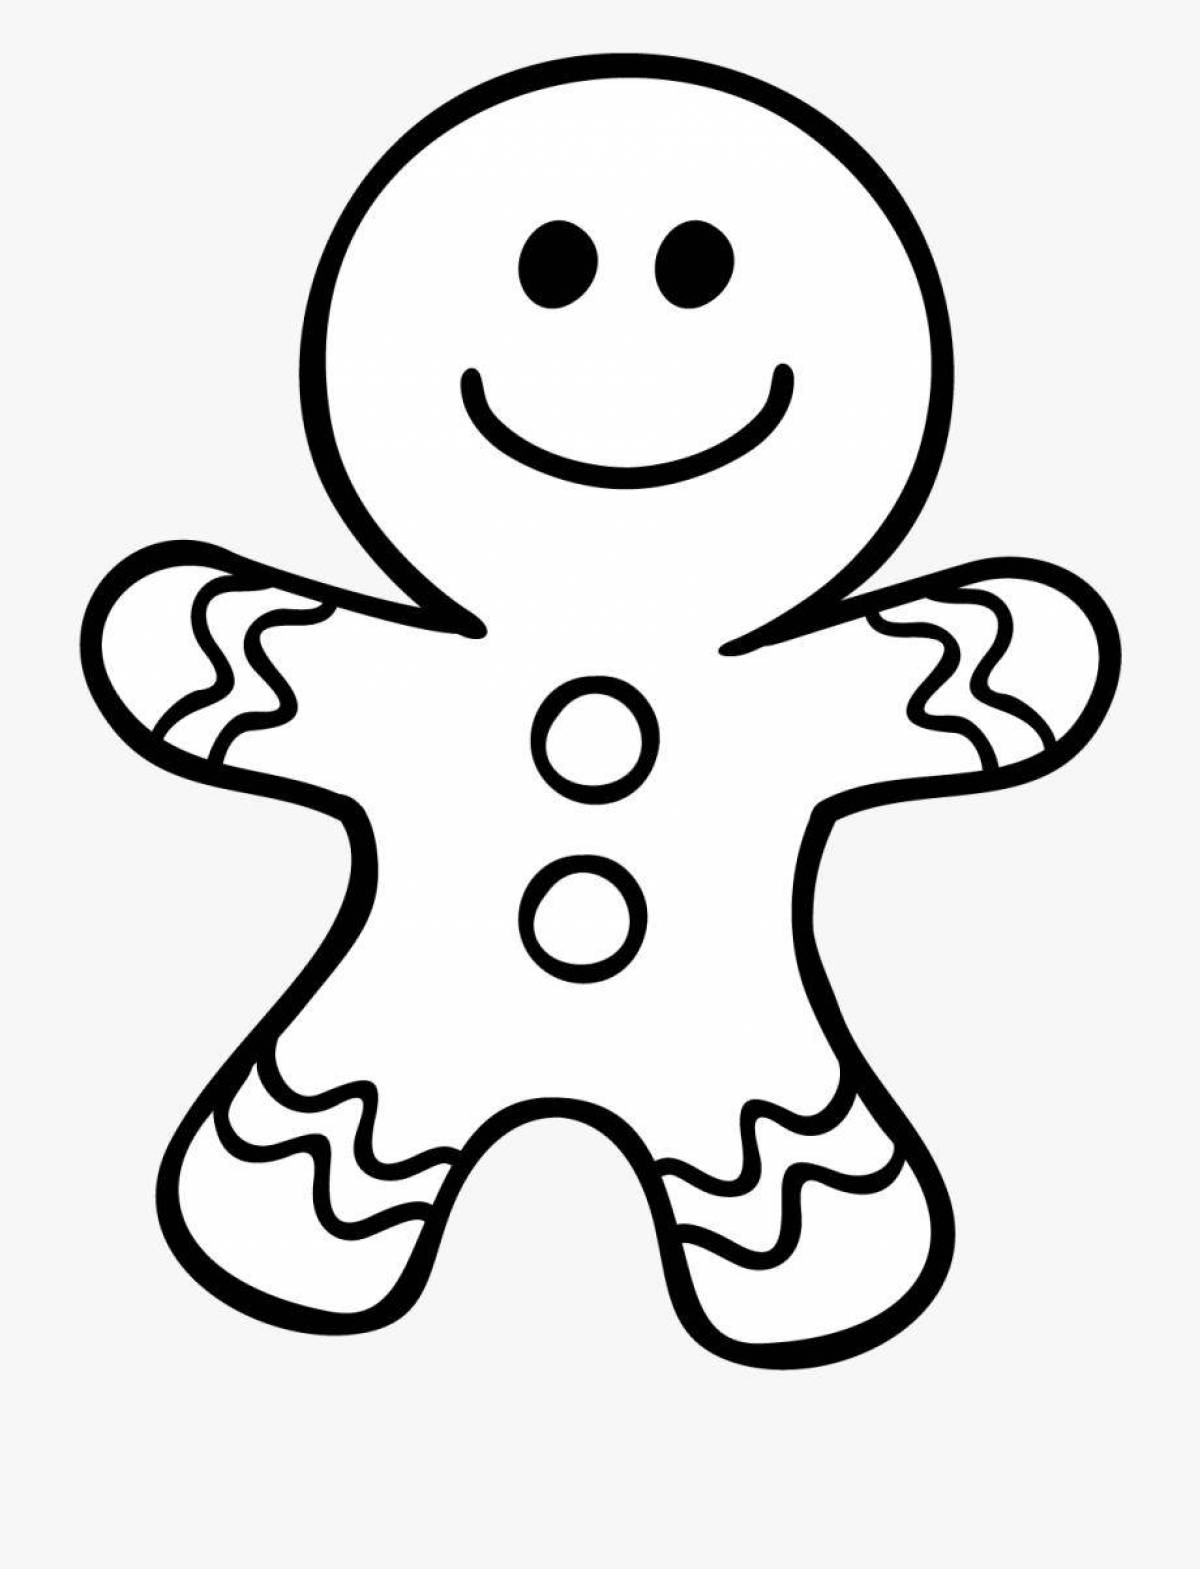 Shrek Cookie Bright Coloring Page